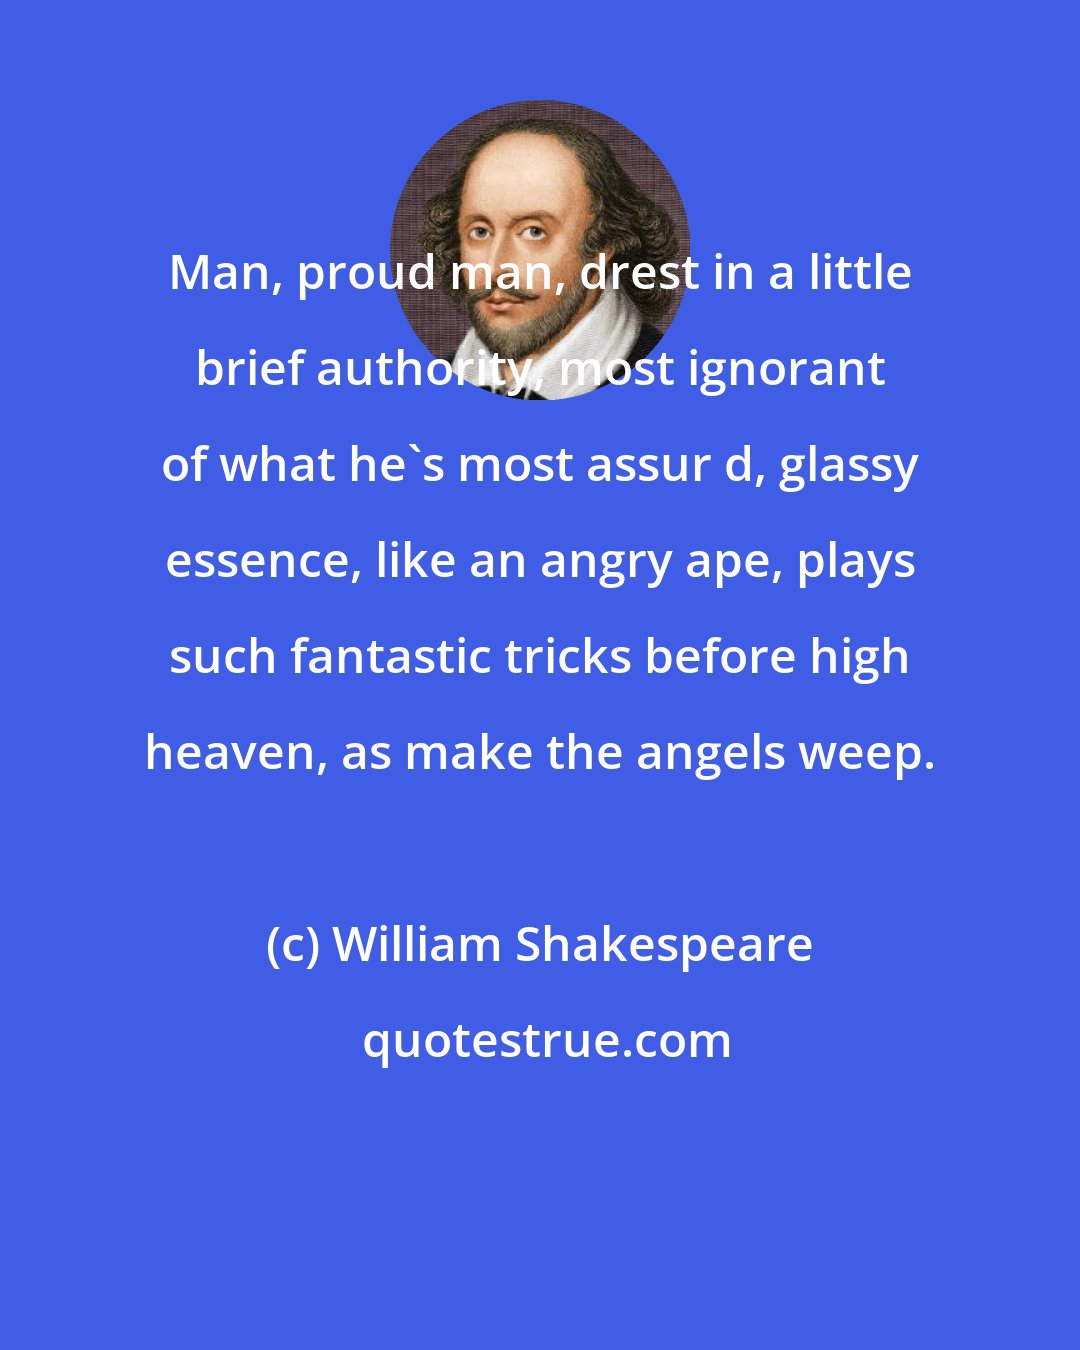 William Shakespeare: Man, proud man, drest in a little brief authority, most ignorant of what he's most assur d, glassy essence, like an angry ape, plays such fantastic tricks before high heaven, as make the angels weep.